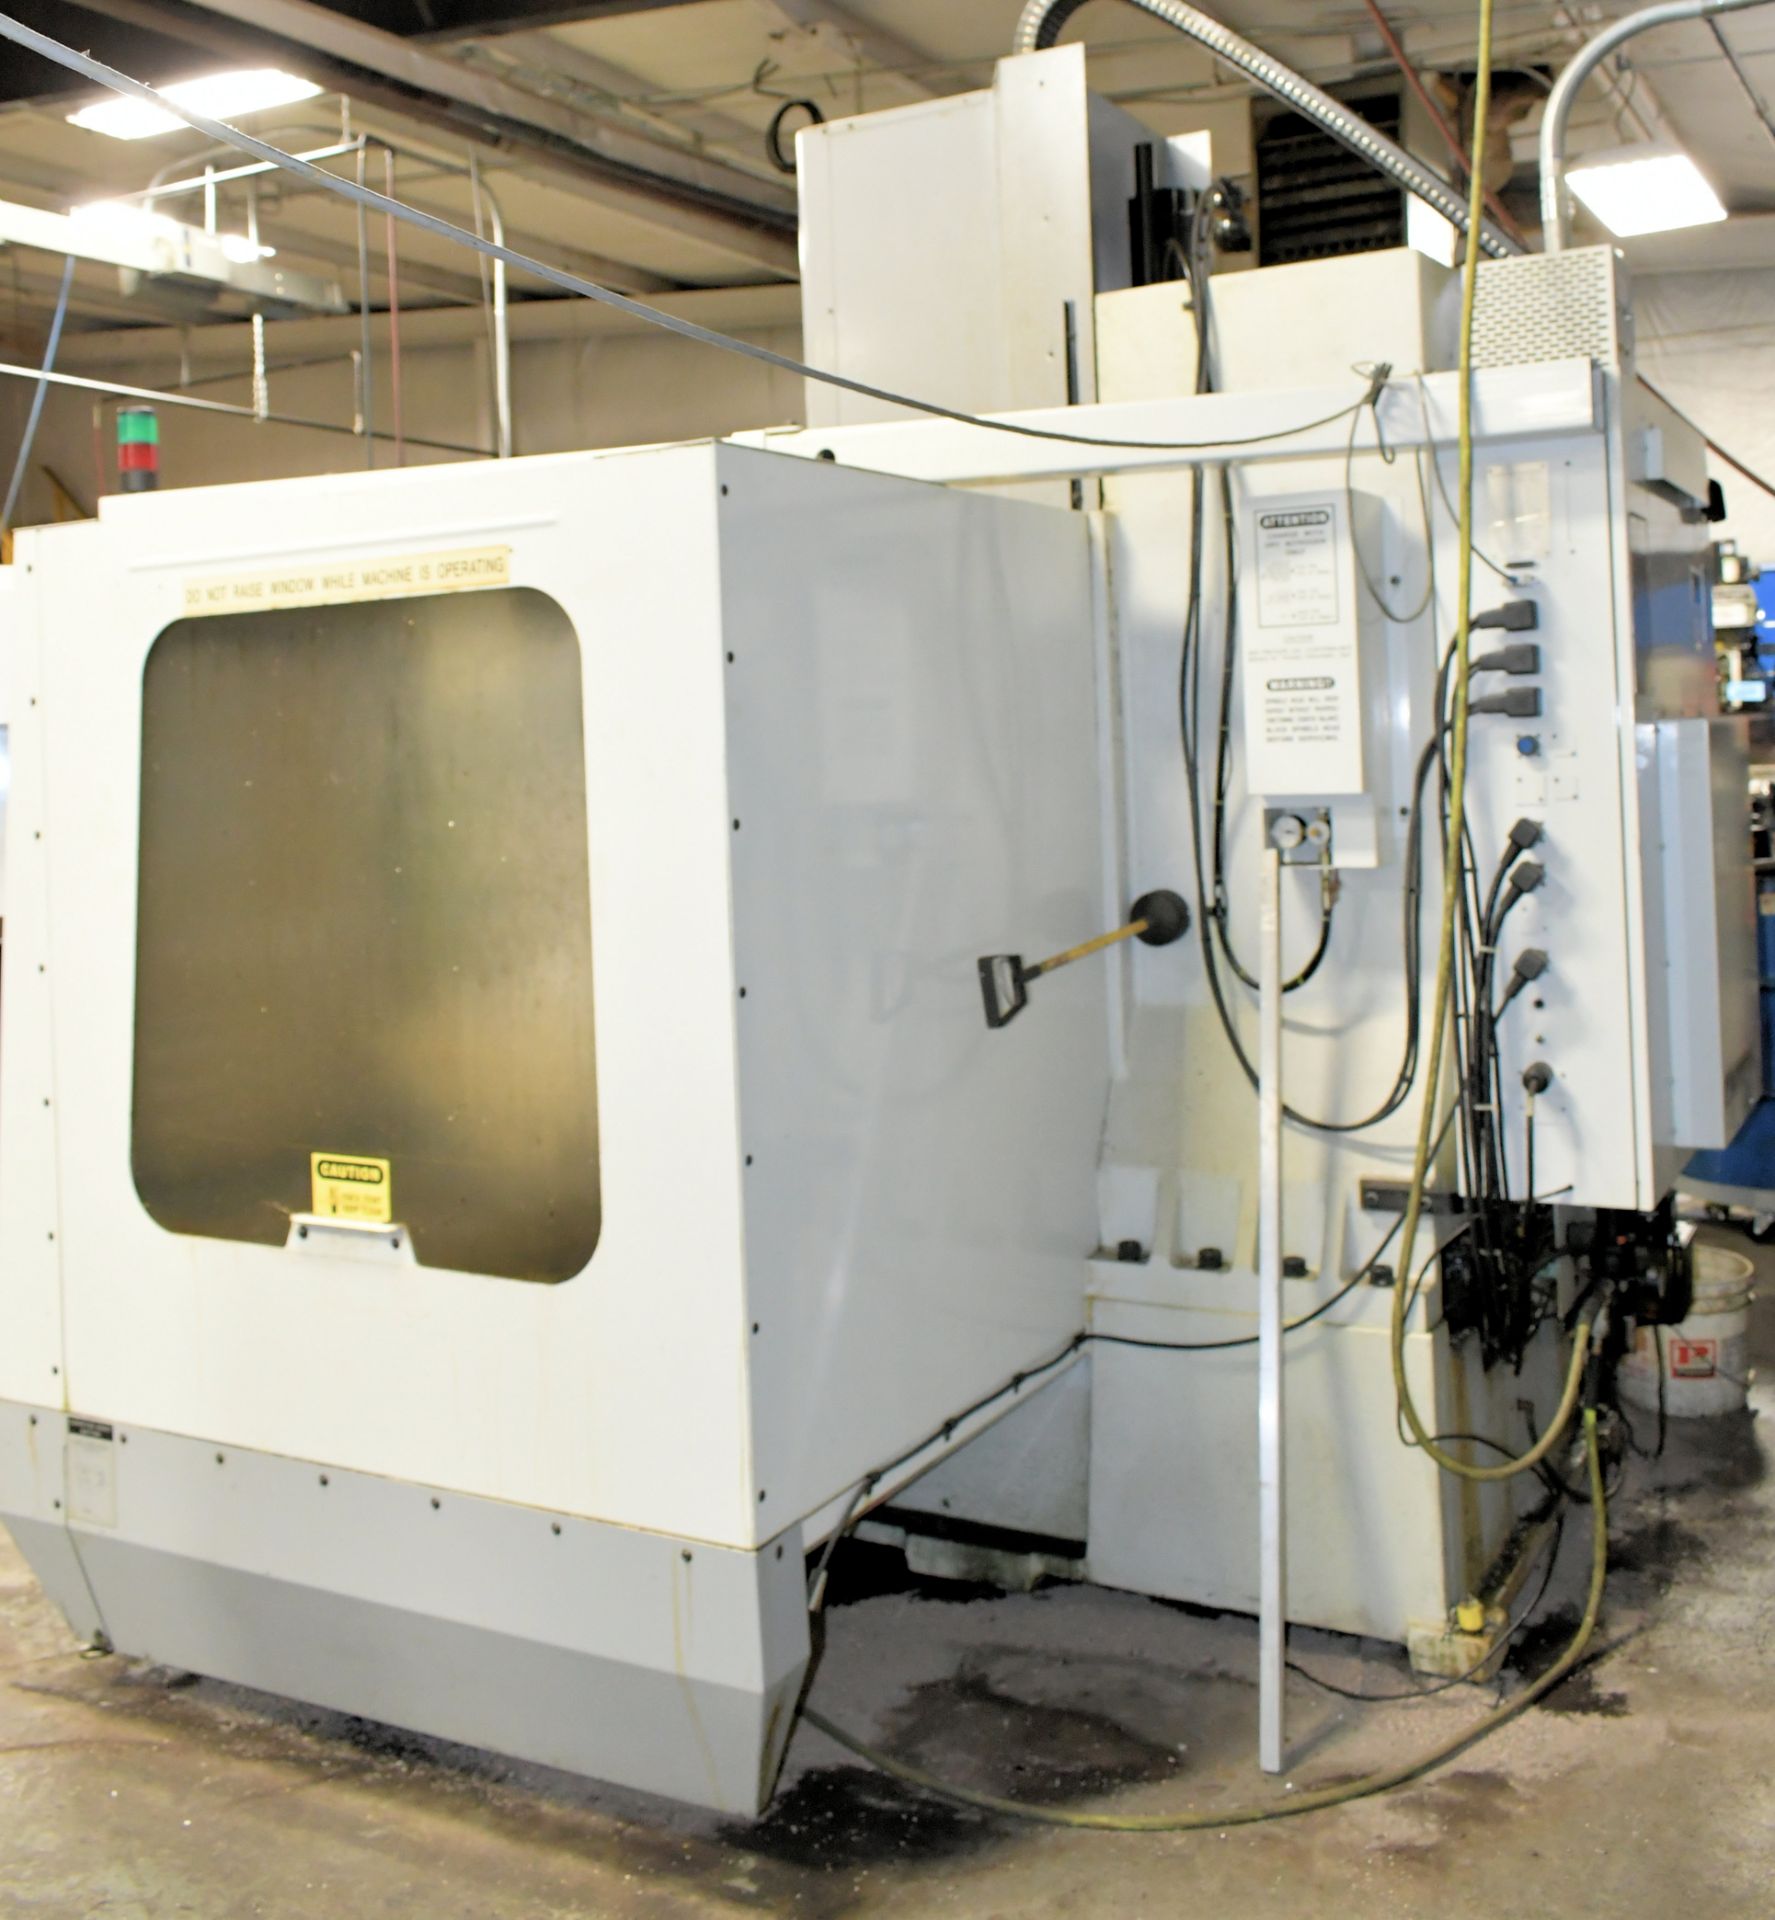 Haas VF-4 CNC Vertical Machining Center - Image 4 of 9